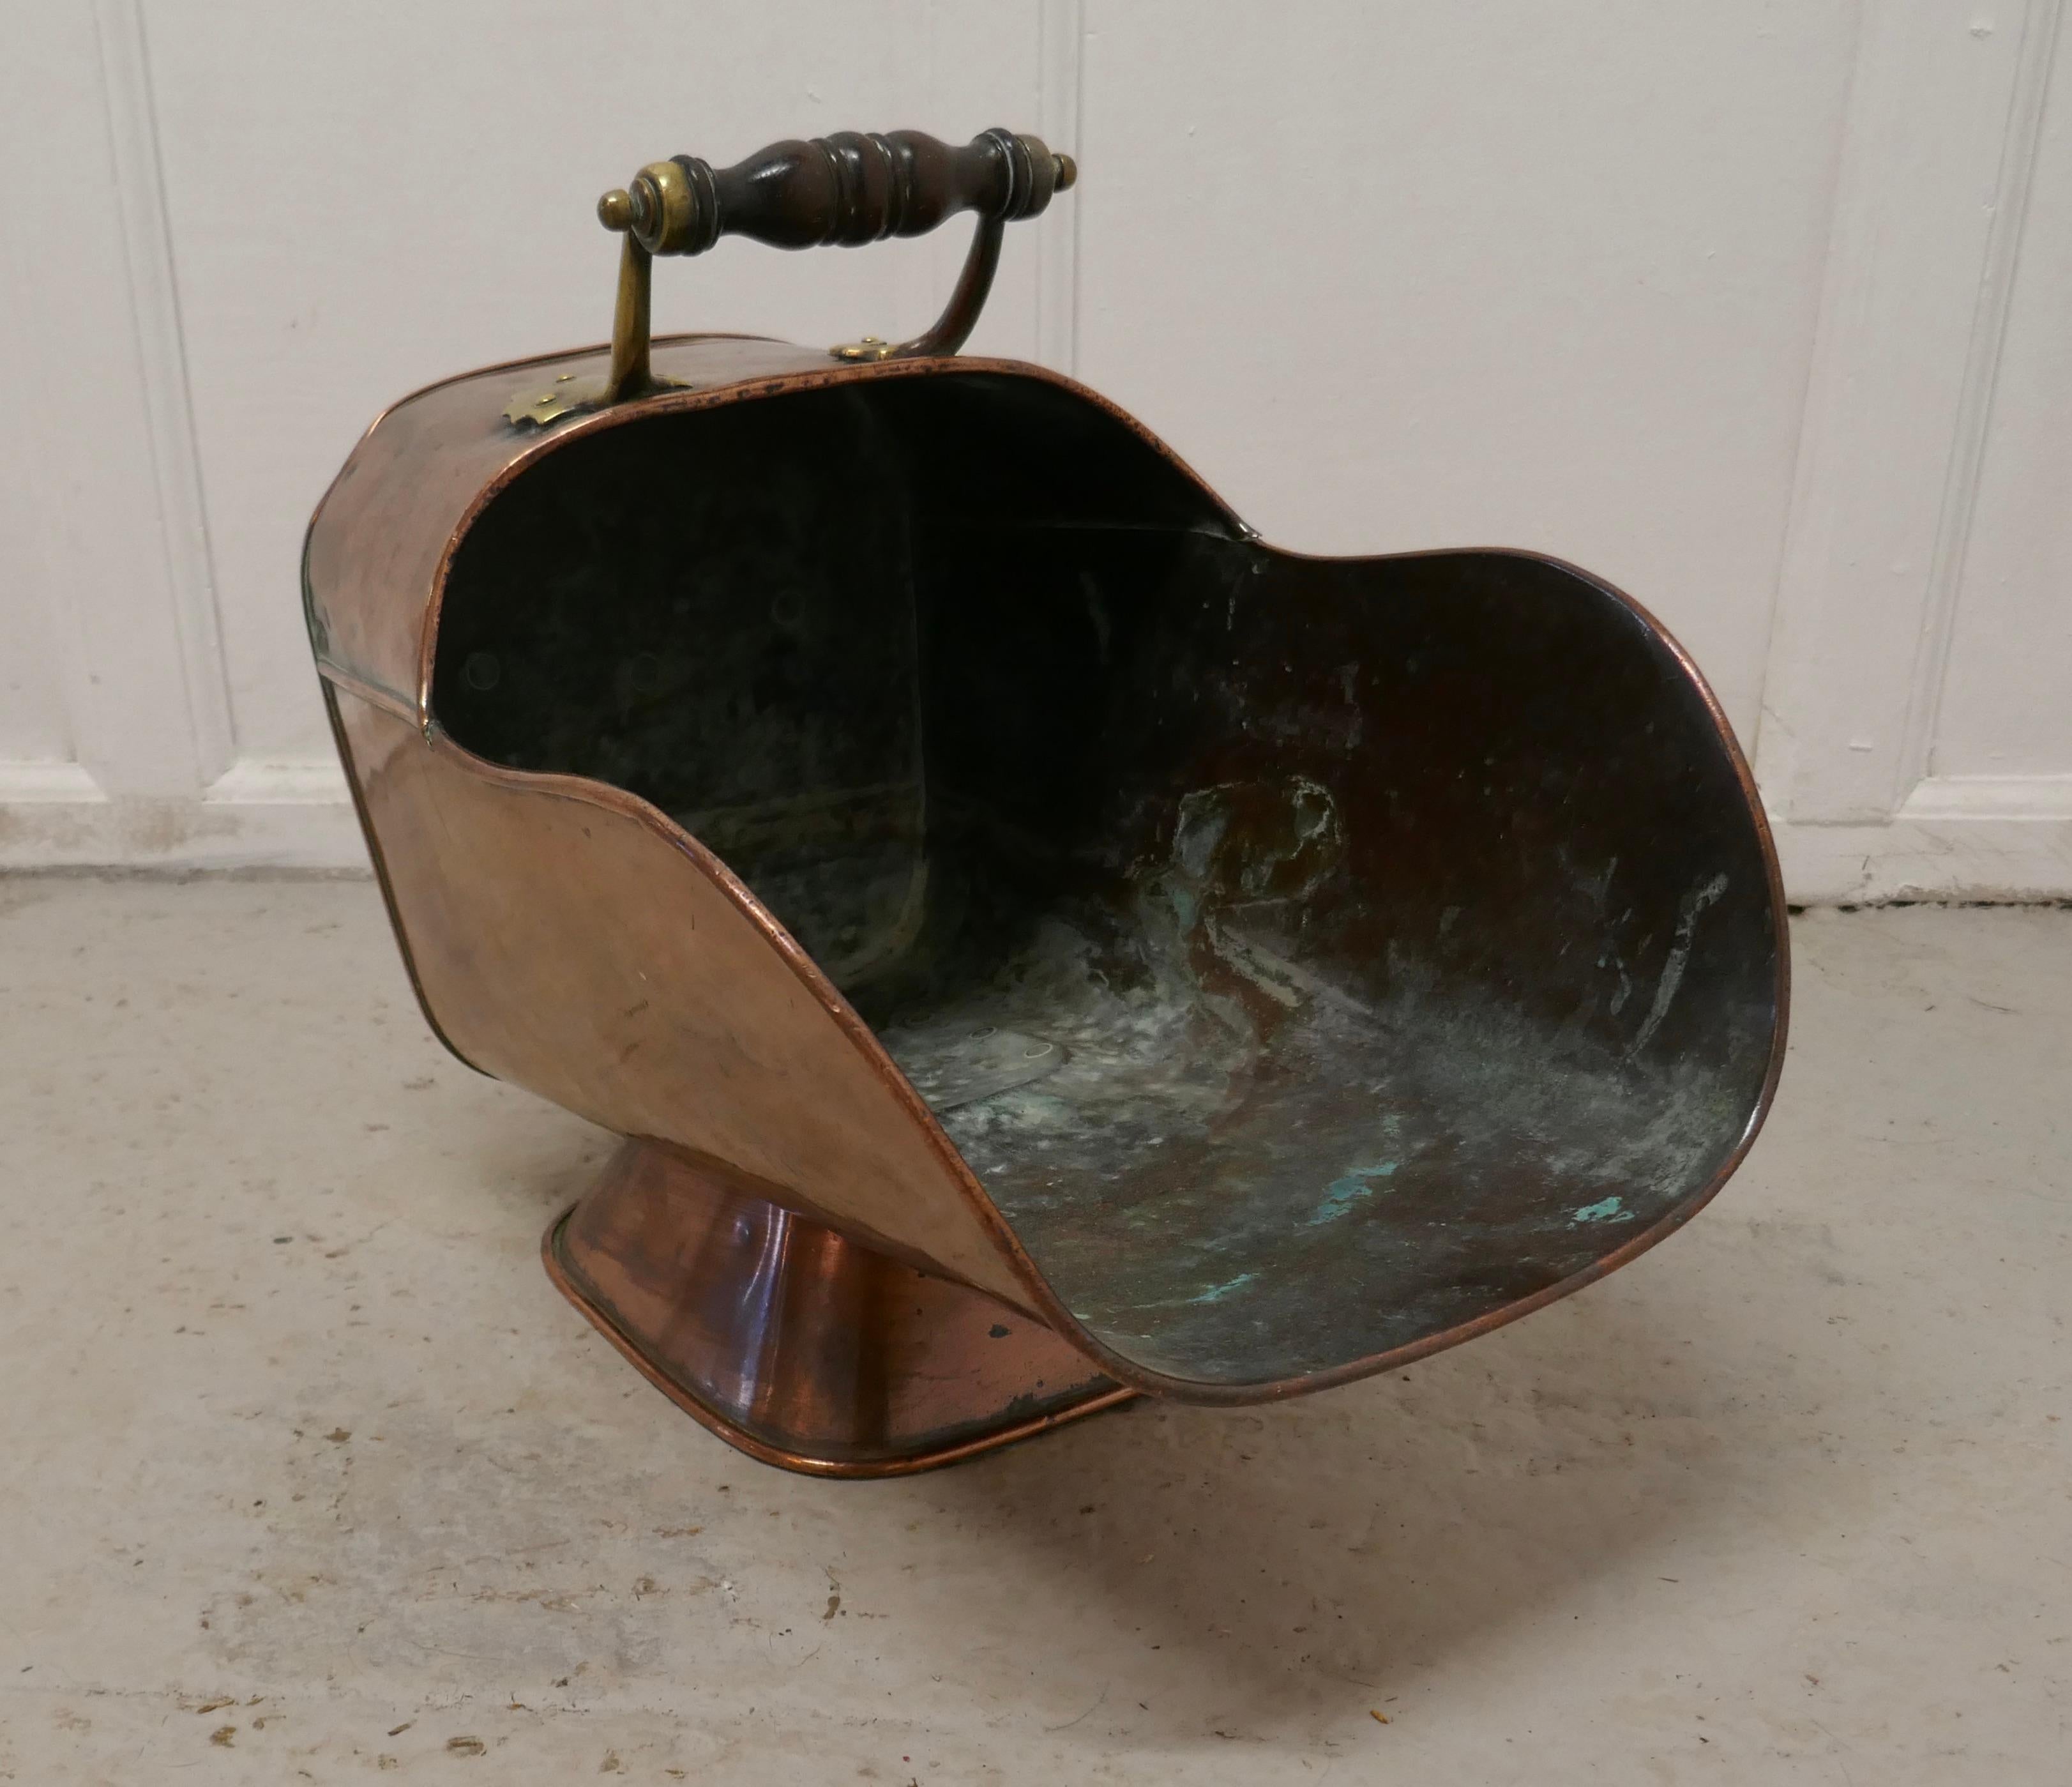 Superb large Arts & Crafts copper helmet coal scuttle

This very top quality piece has good shape, and a broad base foot

The scuttle is in good condition polished and ready to use, it has no faults just lots of character and is ready to go to